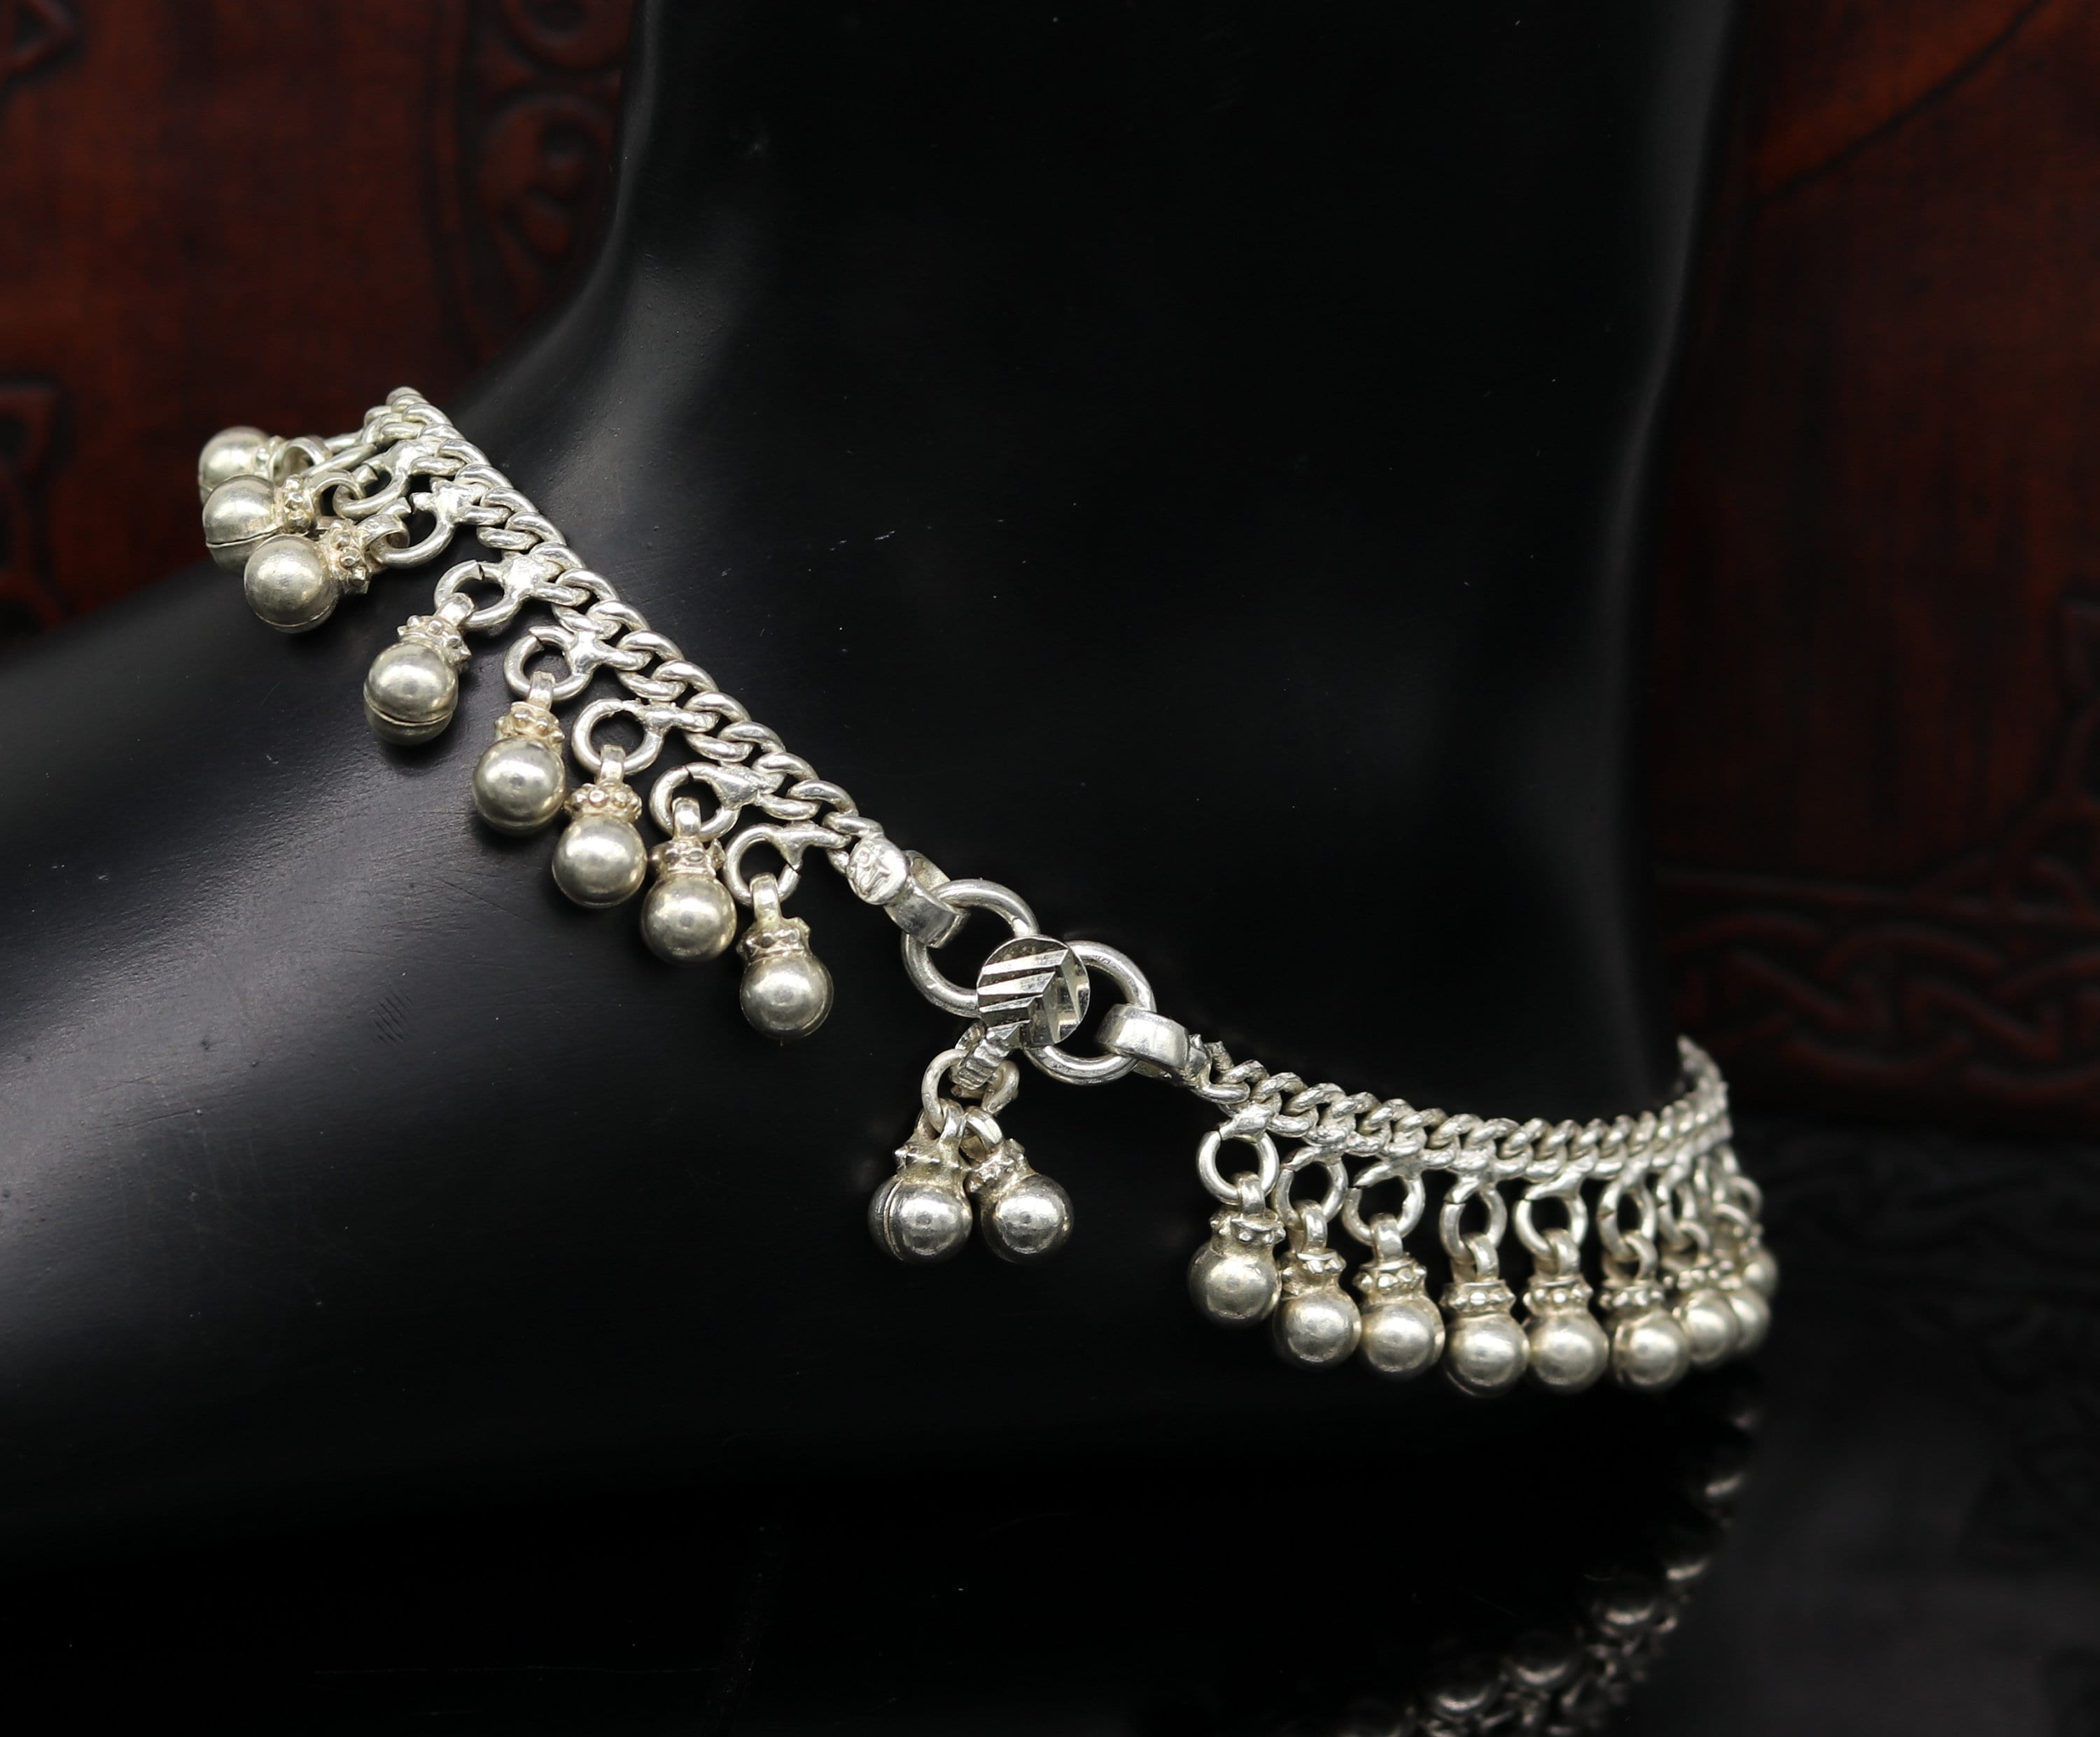 TribalOrnaments Solid Sterling Silver Handmade Vintage Style Heavy Noisy Bells Single Anklet ,amazing Tribal Ankle Jewelry Belly Dance Jewelry nank271